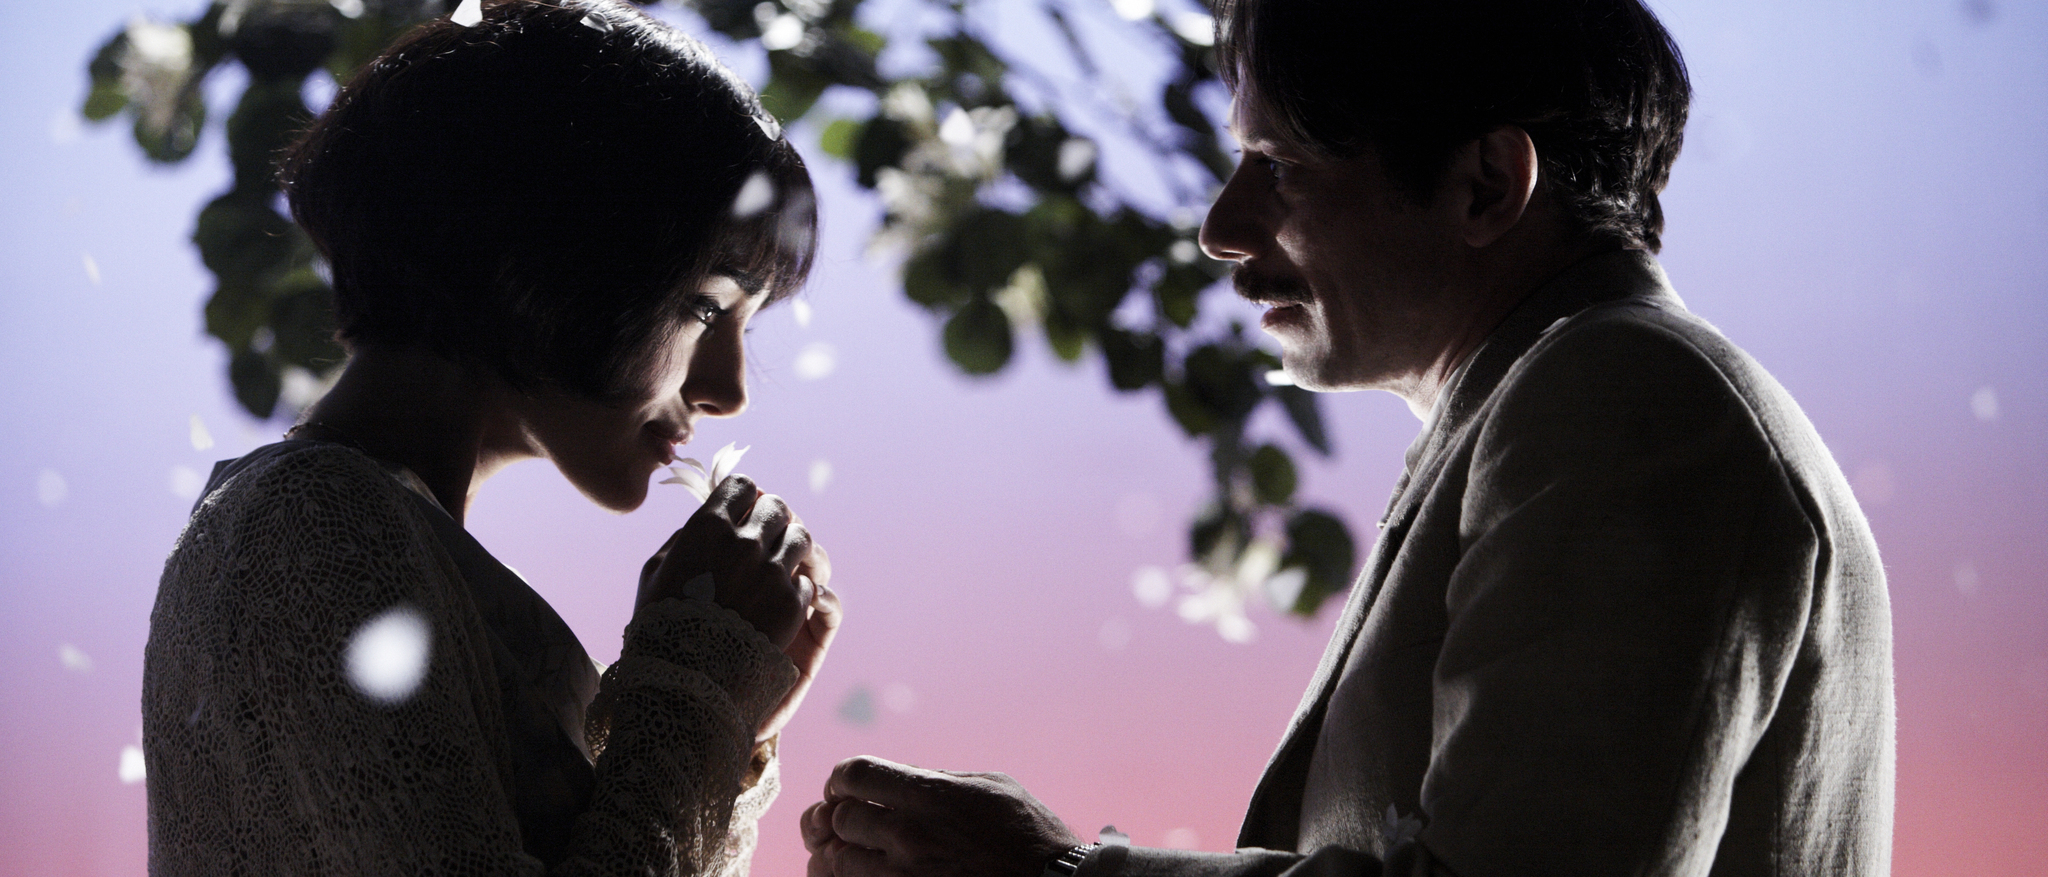 Still of Mathieu Amalric and Golshifteh Farahani in Poulet aux prunes (2011)